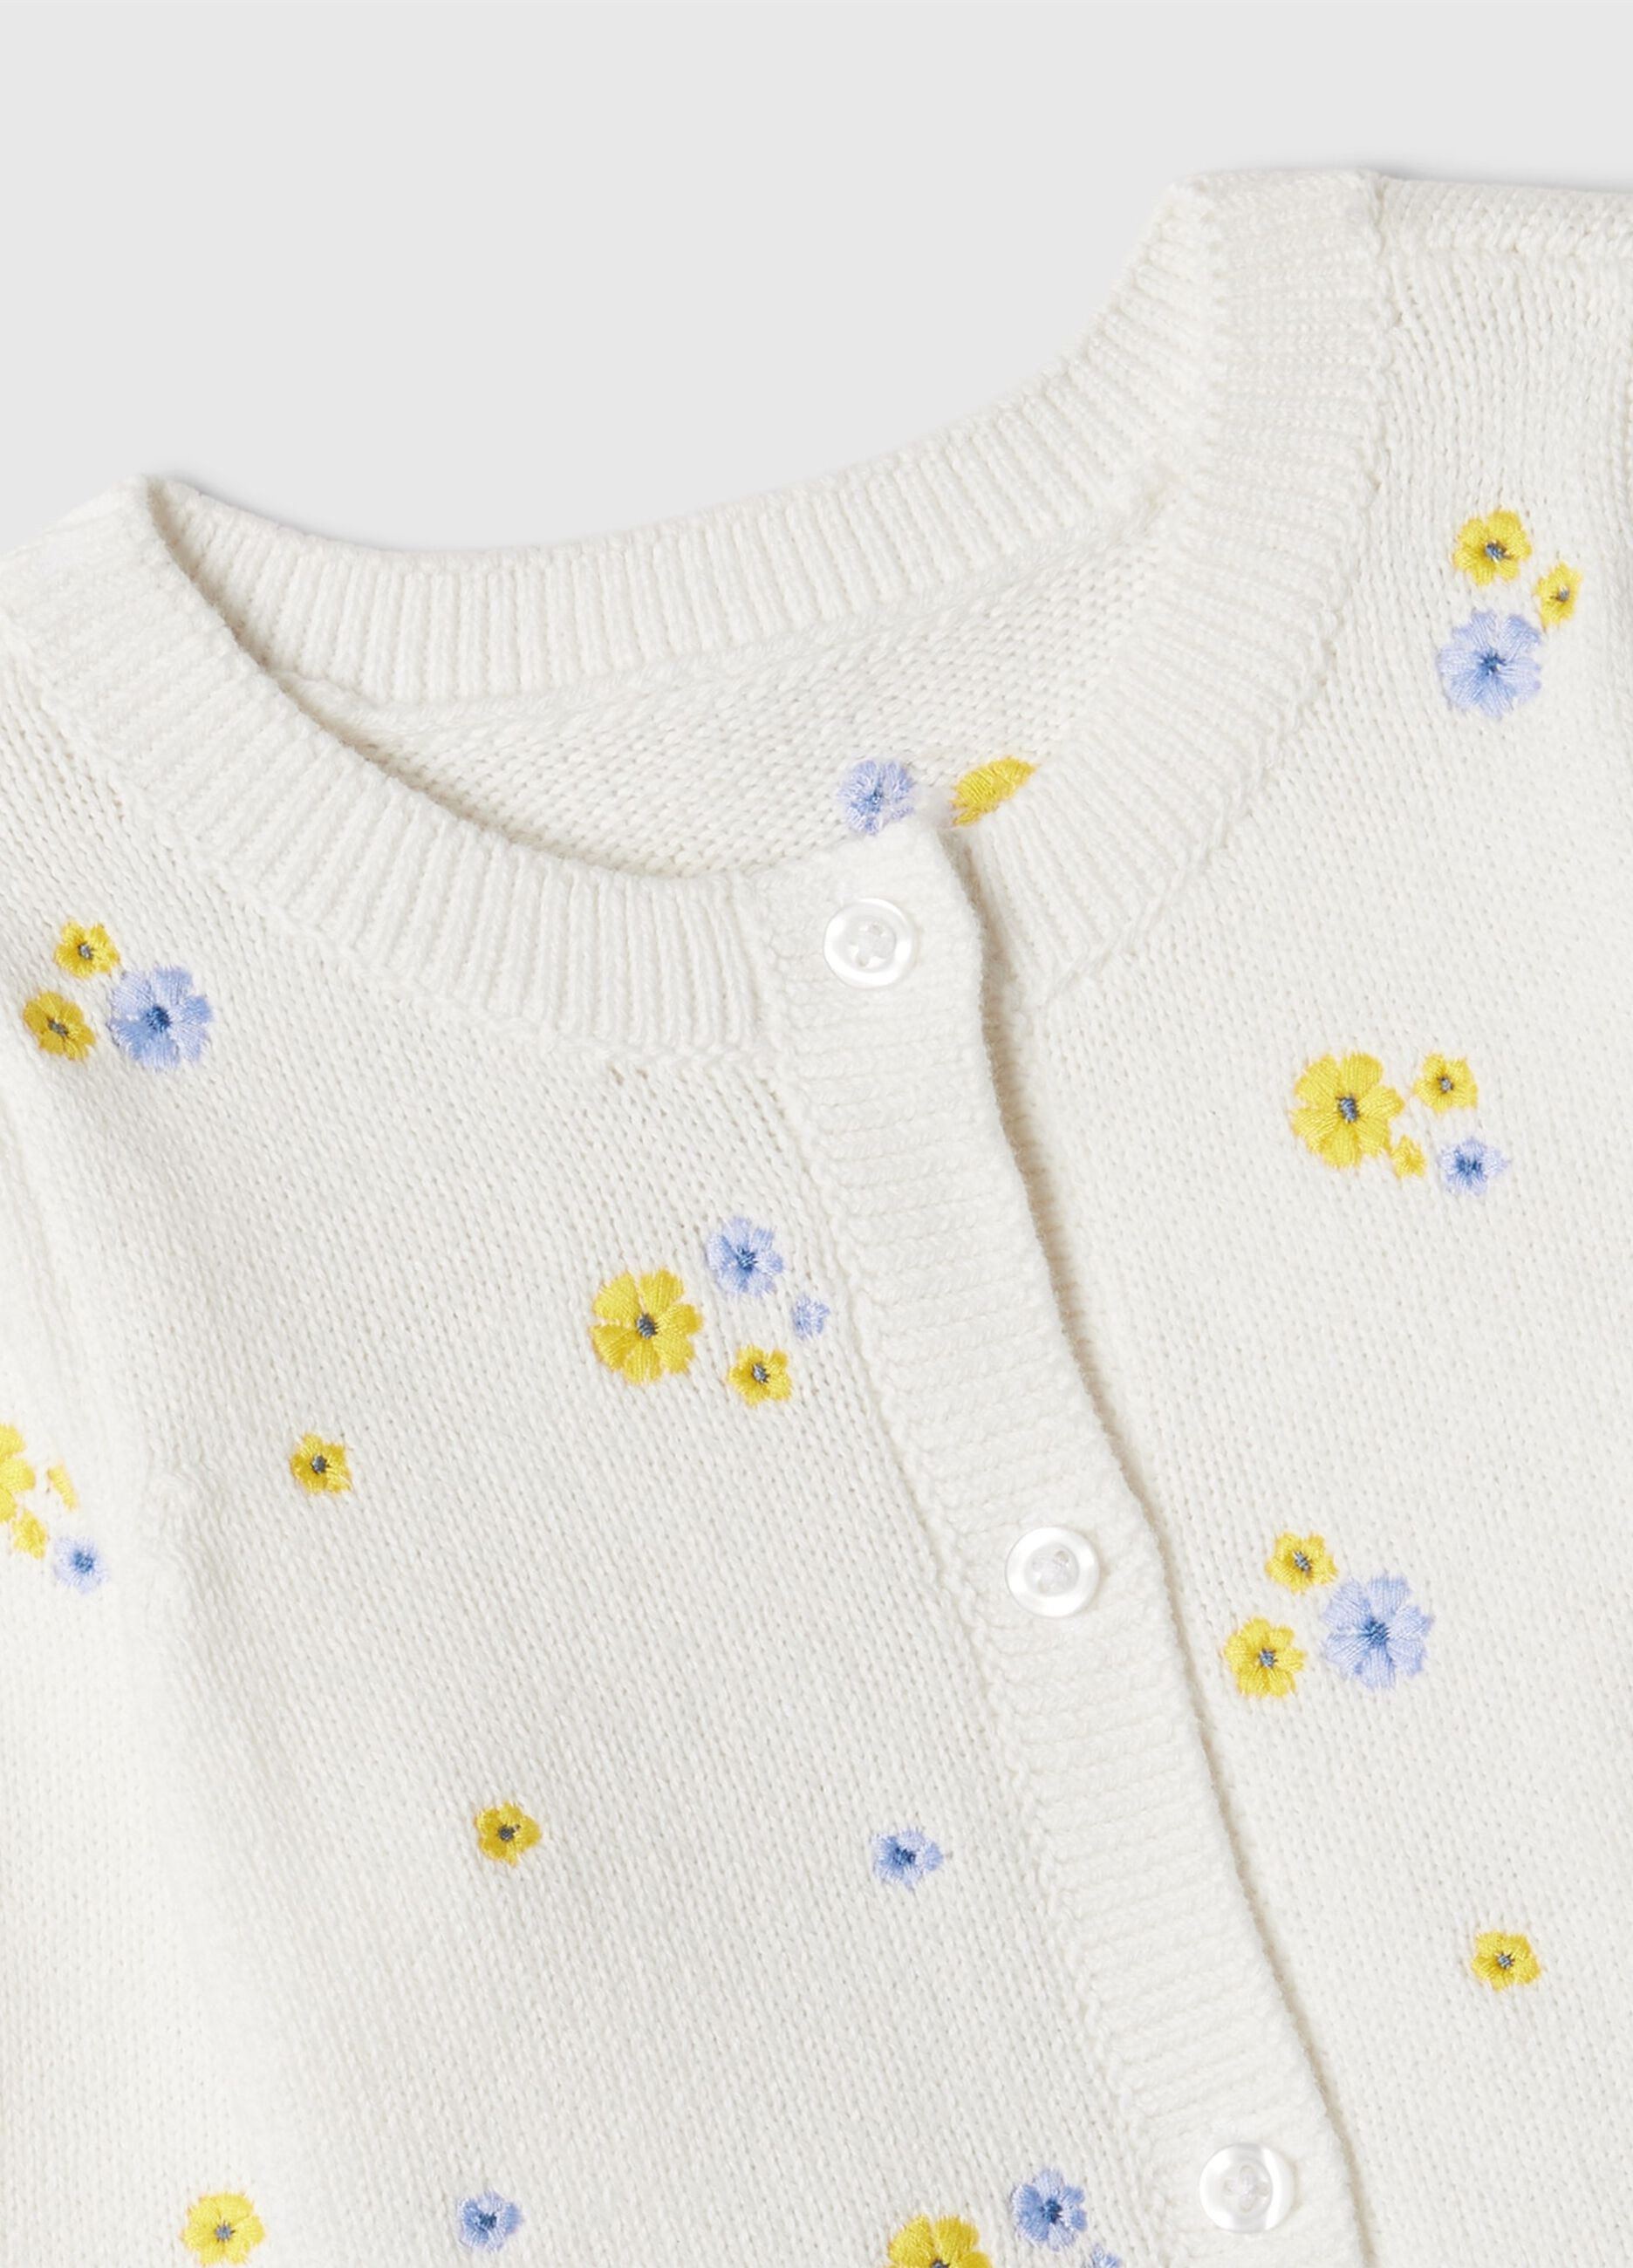 Cotton cardigan with small flowers embroidery